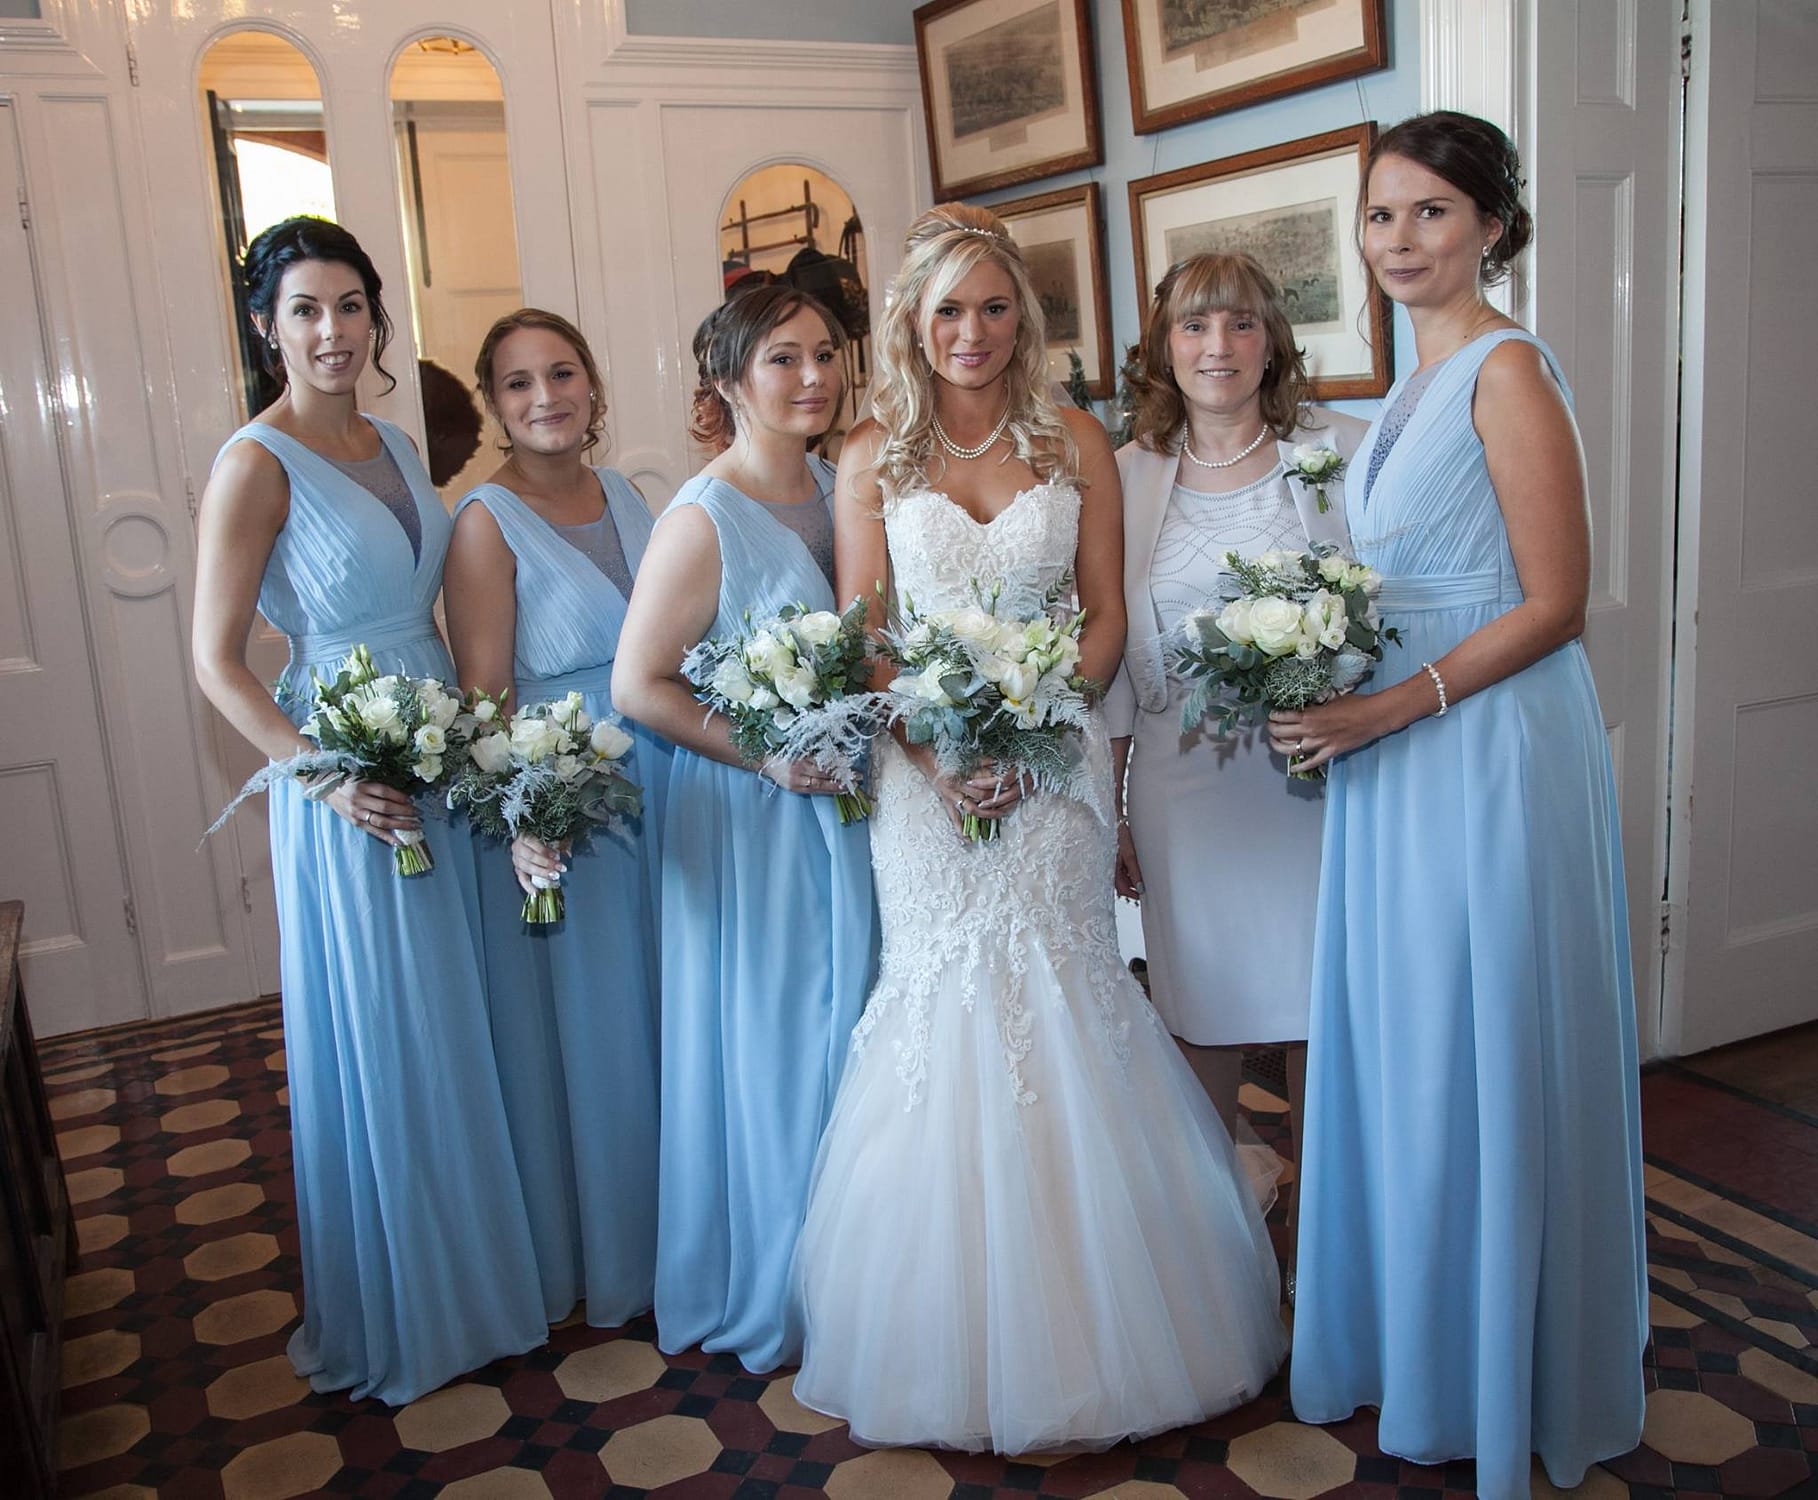 Winter wedding flowers sussex. Bride and bridesmaids in frozen ice blue dresses